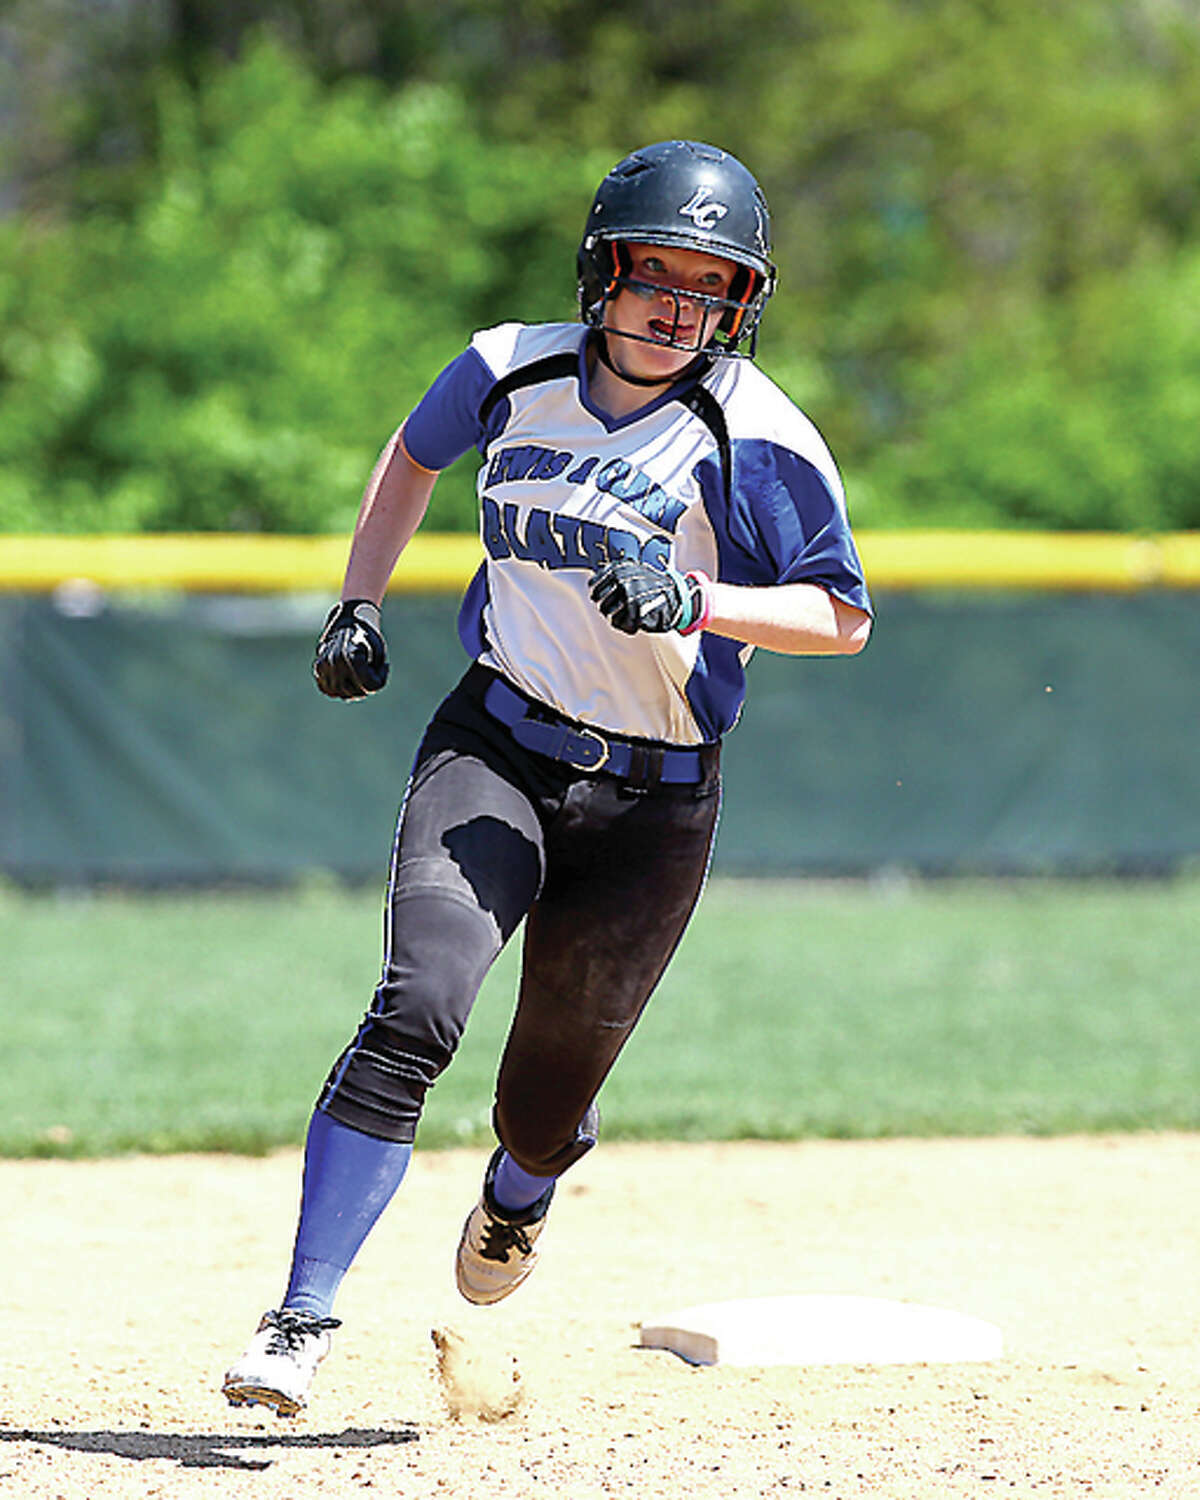 LCCC's Emily Haarmann rounds second base on an RBI triple during the seventh inning of Saturday's game against Lincoln Land in Godfrey. Billy Hurst - For the Telegraph